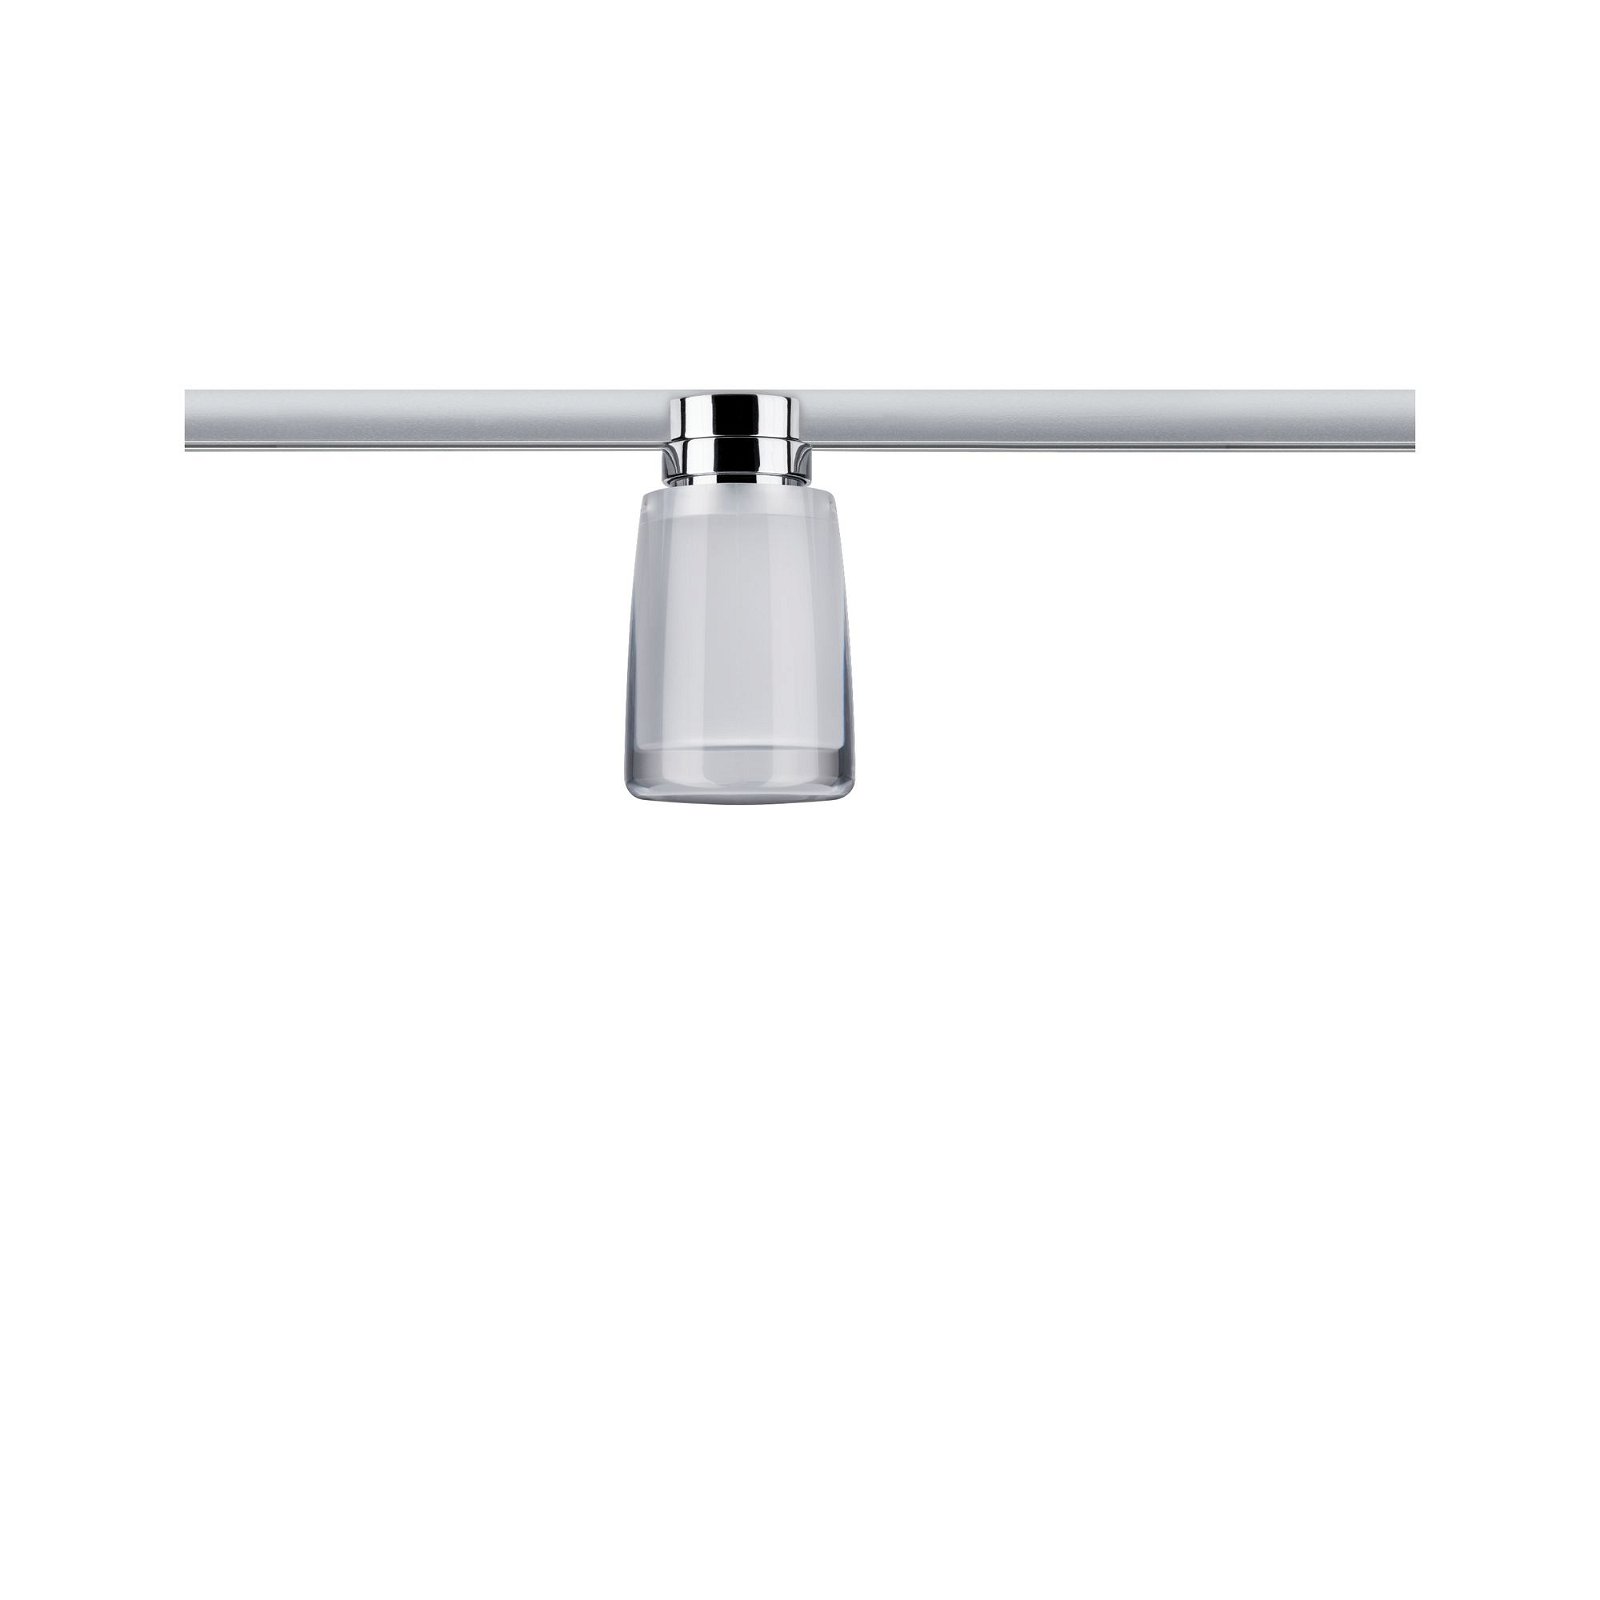 Safira URail LED ceiling spot 5.2 W Chrome/clear/satin dimmable